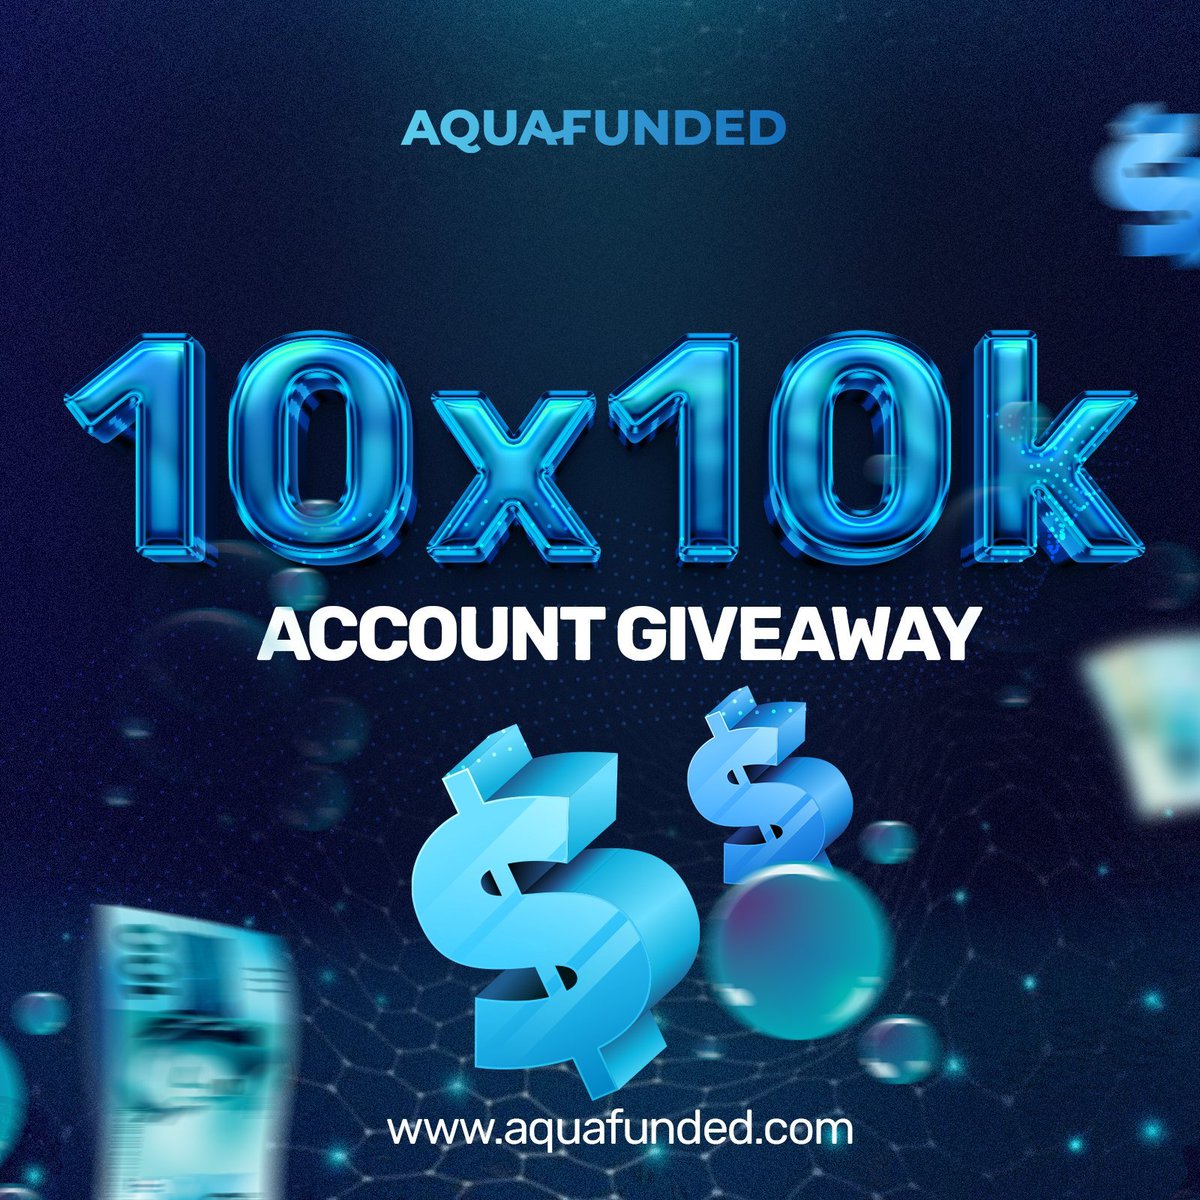 🌊 $10x10K GIVEAWAY TIME 🌊

1️⃣ Follow @AquaFunded, turn notifications on & remain active 🔔
2️⃣ Like & Retweet & tag 4 traders
3️⃣ Engage with our pinned post

Ends in 72h 🌊